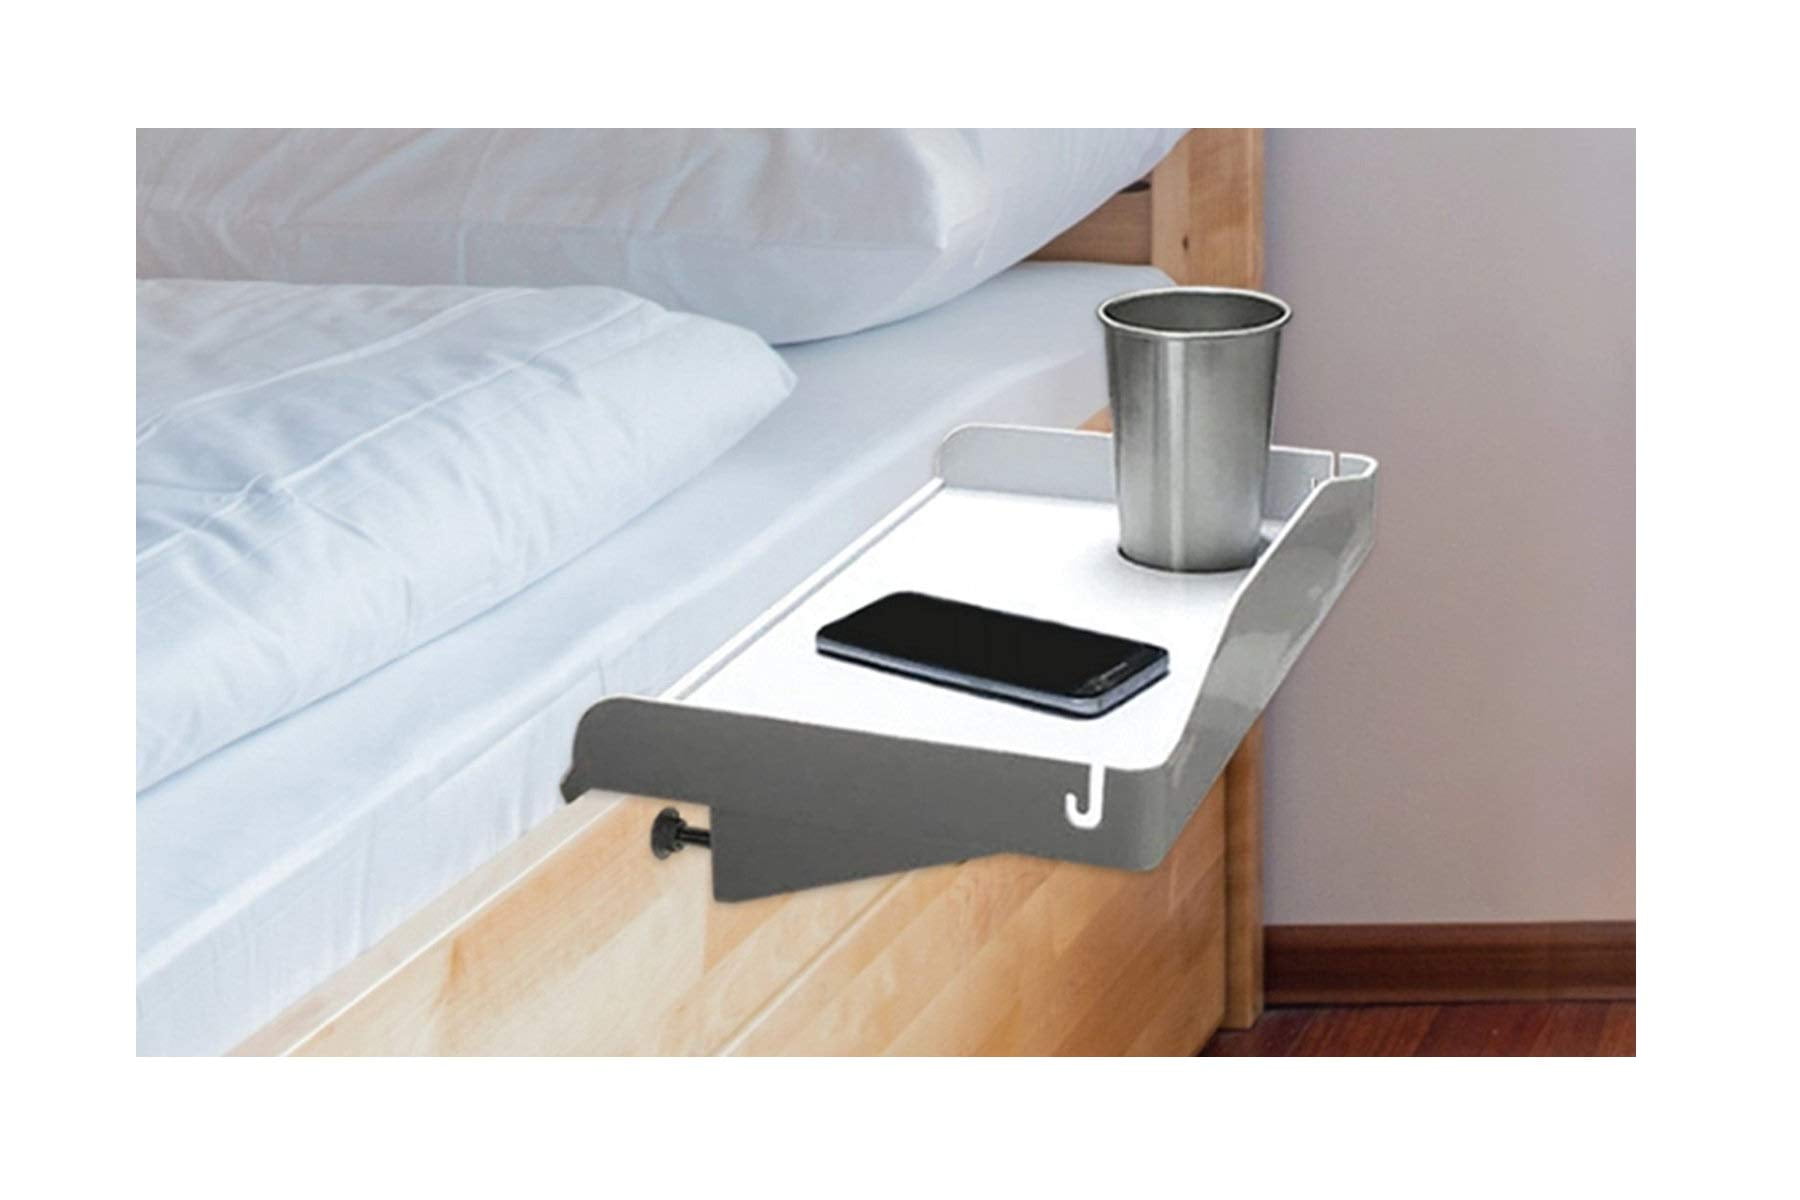 Photo 1 of Bedside Clip On White Plastic Nightstand With Cup Holder Perfect for Bunk Beds (MAJOR SMASH ON PACKAING)